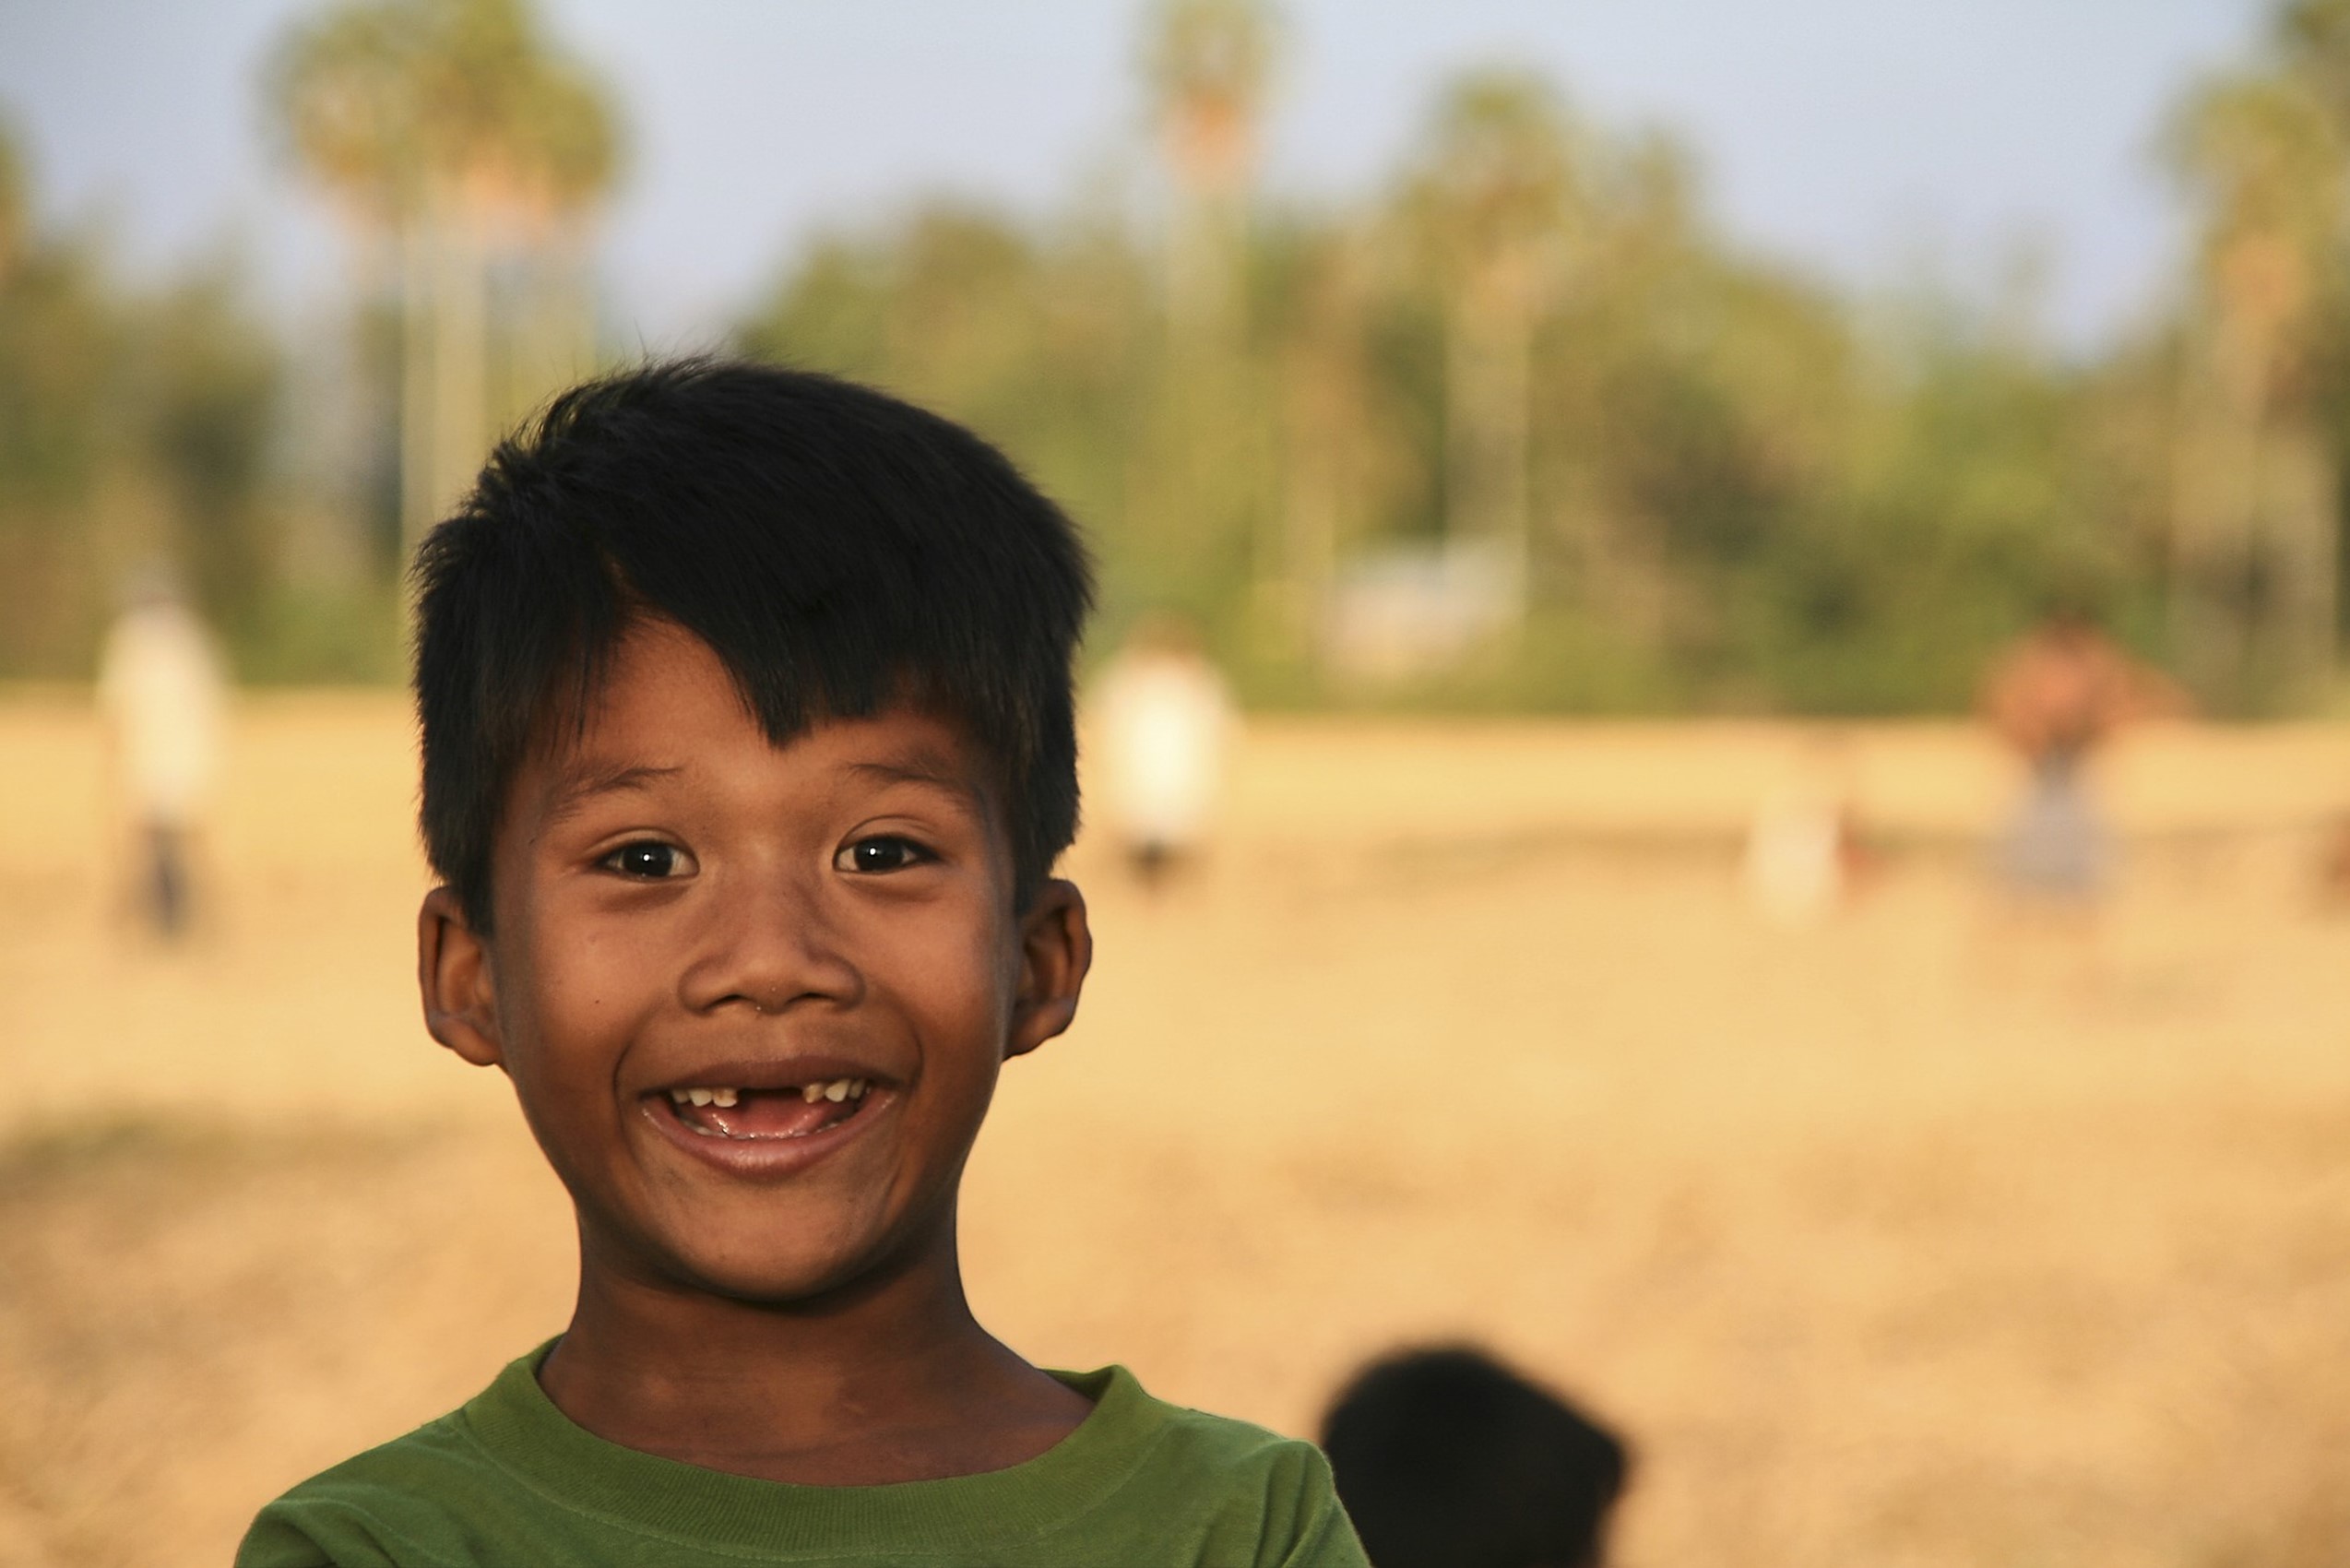 An image of a child standing in a landscape with trees and grass and people in the background which is all out of focus and so blurred. The child is boy about the age of 6 and is smiling and has two front teeth missing. 